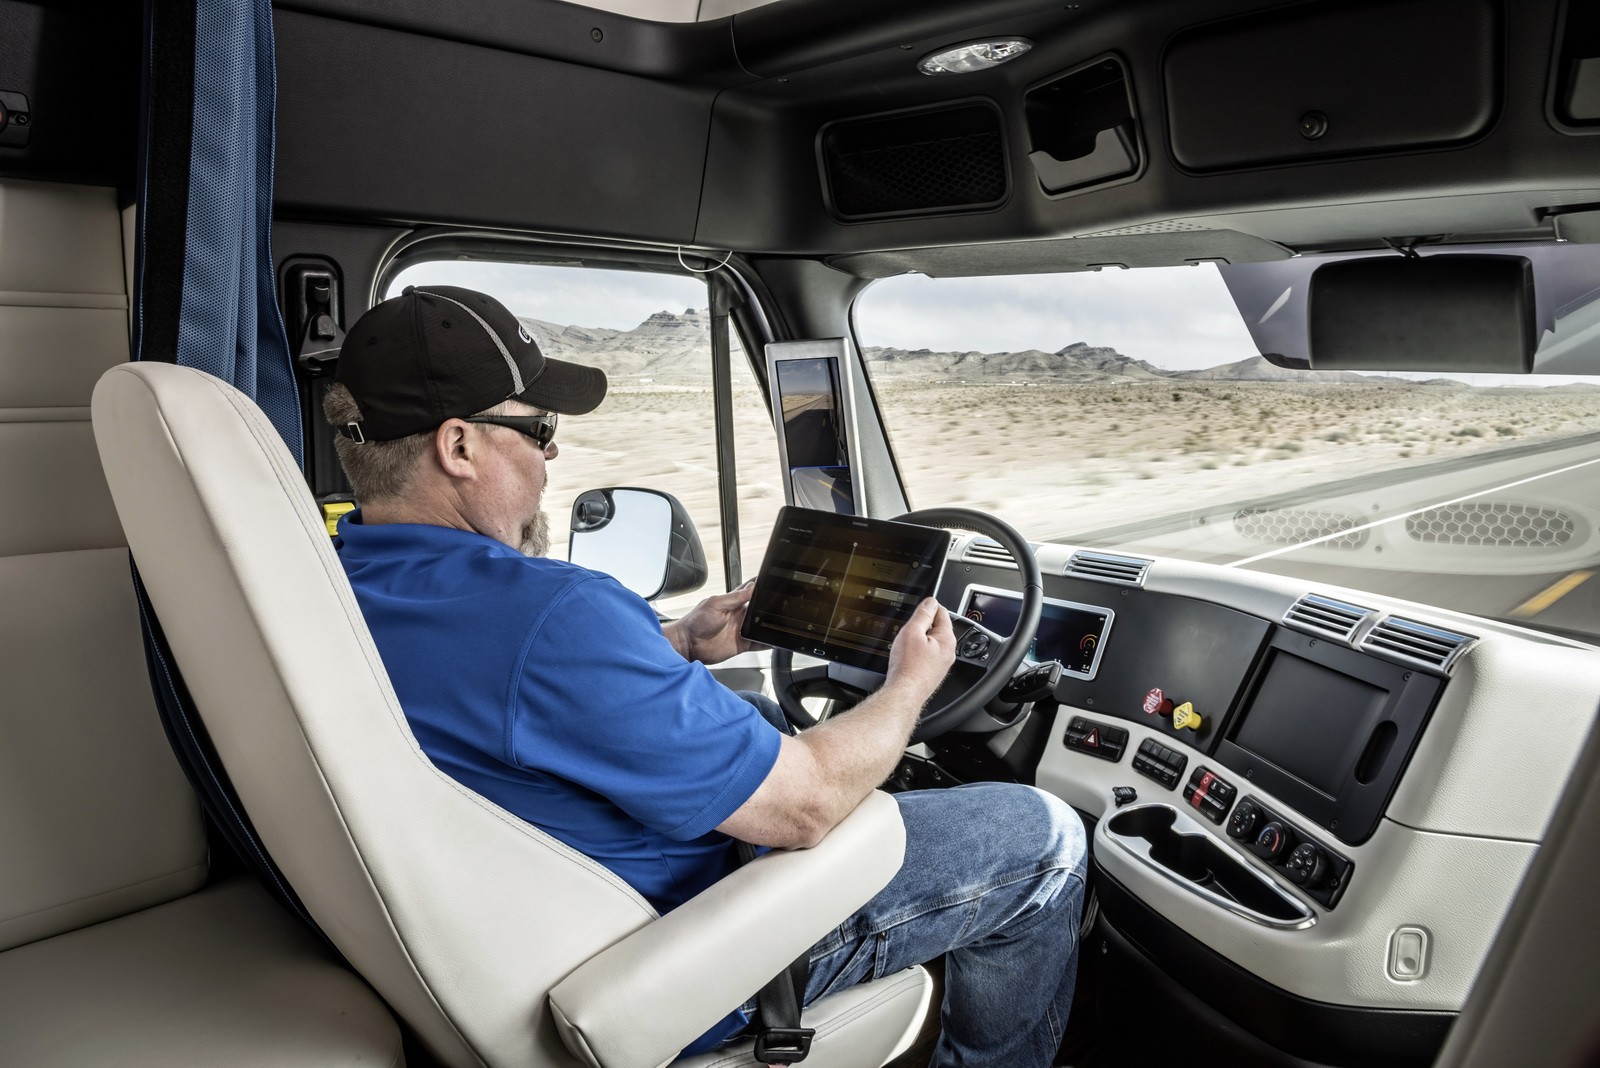 Freightliner Inspiration Truck Can Now Self-Drive Itself Legally in the U.S...